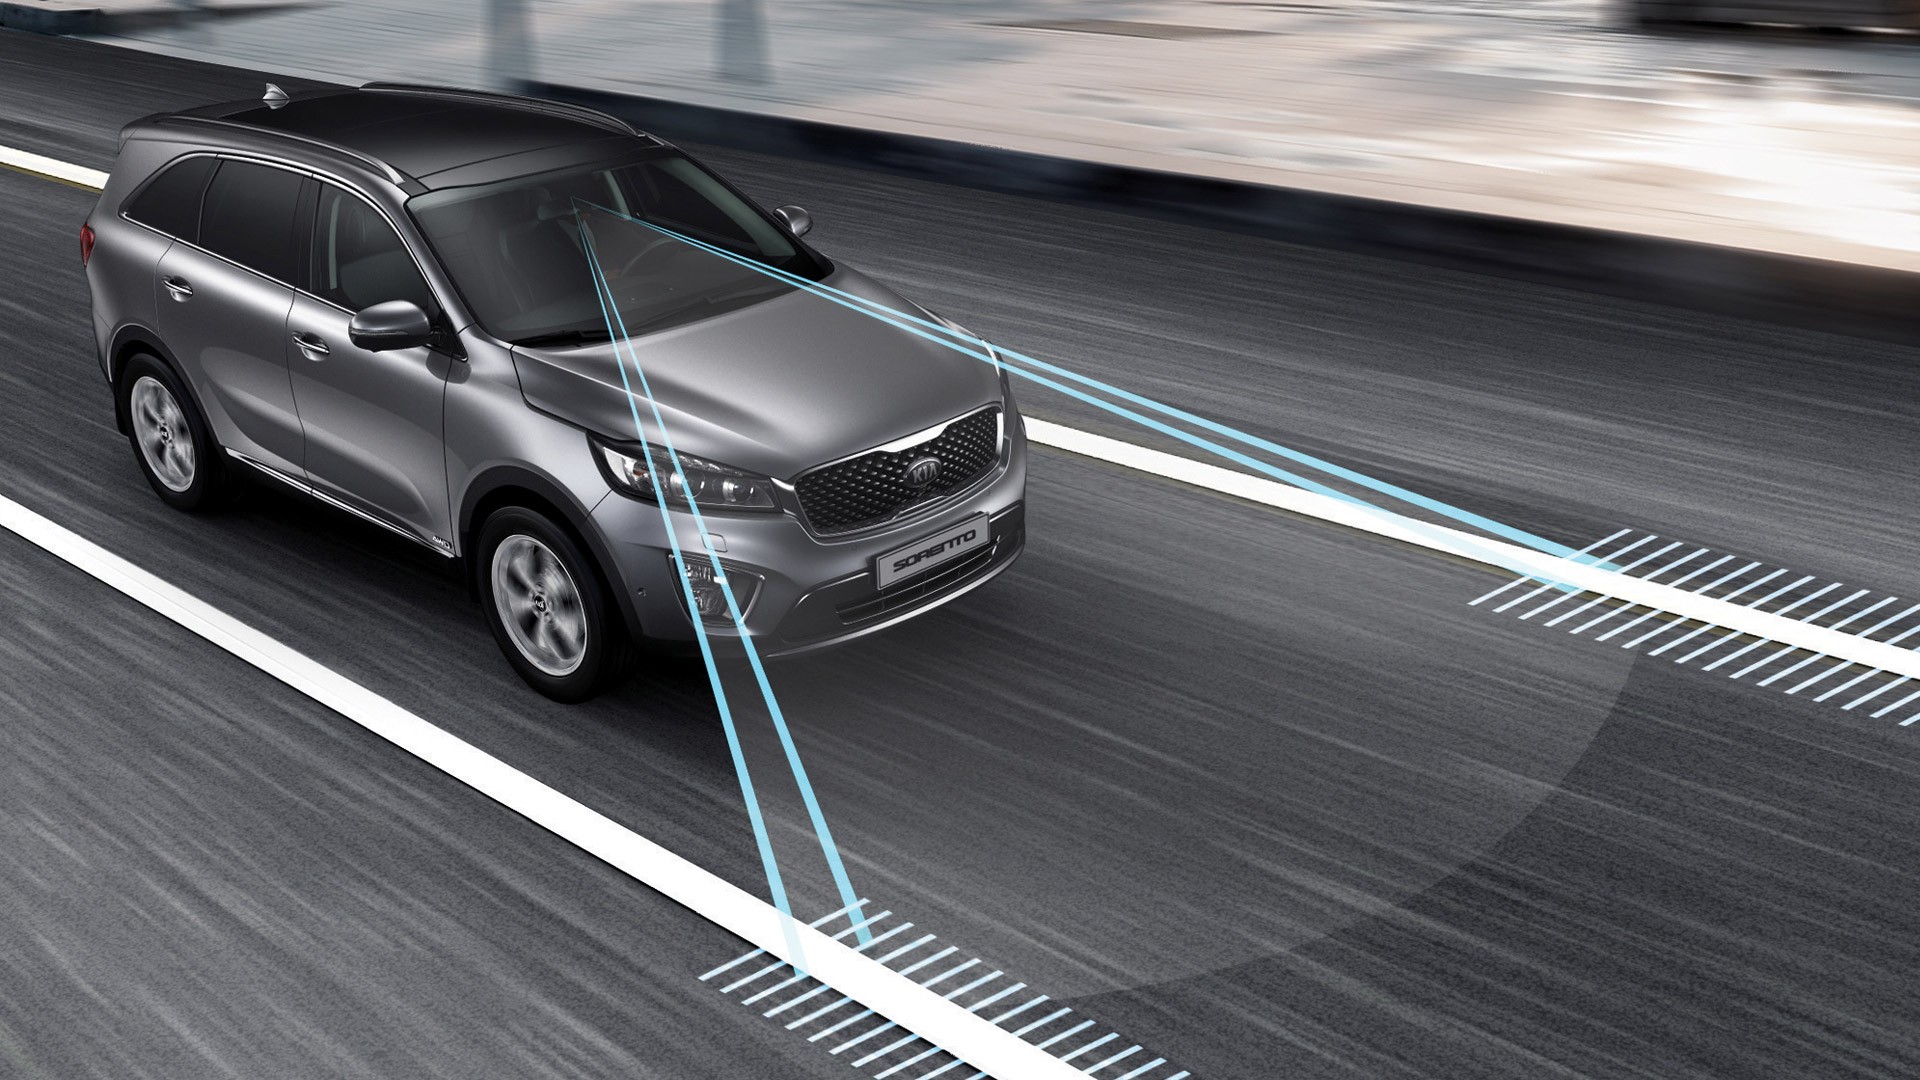 NHTSA Mandates Crash Reporting For Vehicles Equipped With ADAS And ADS